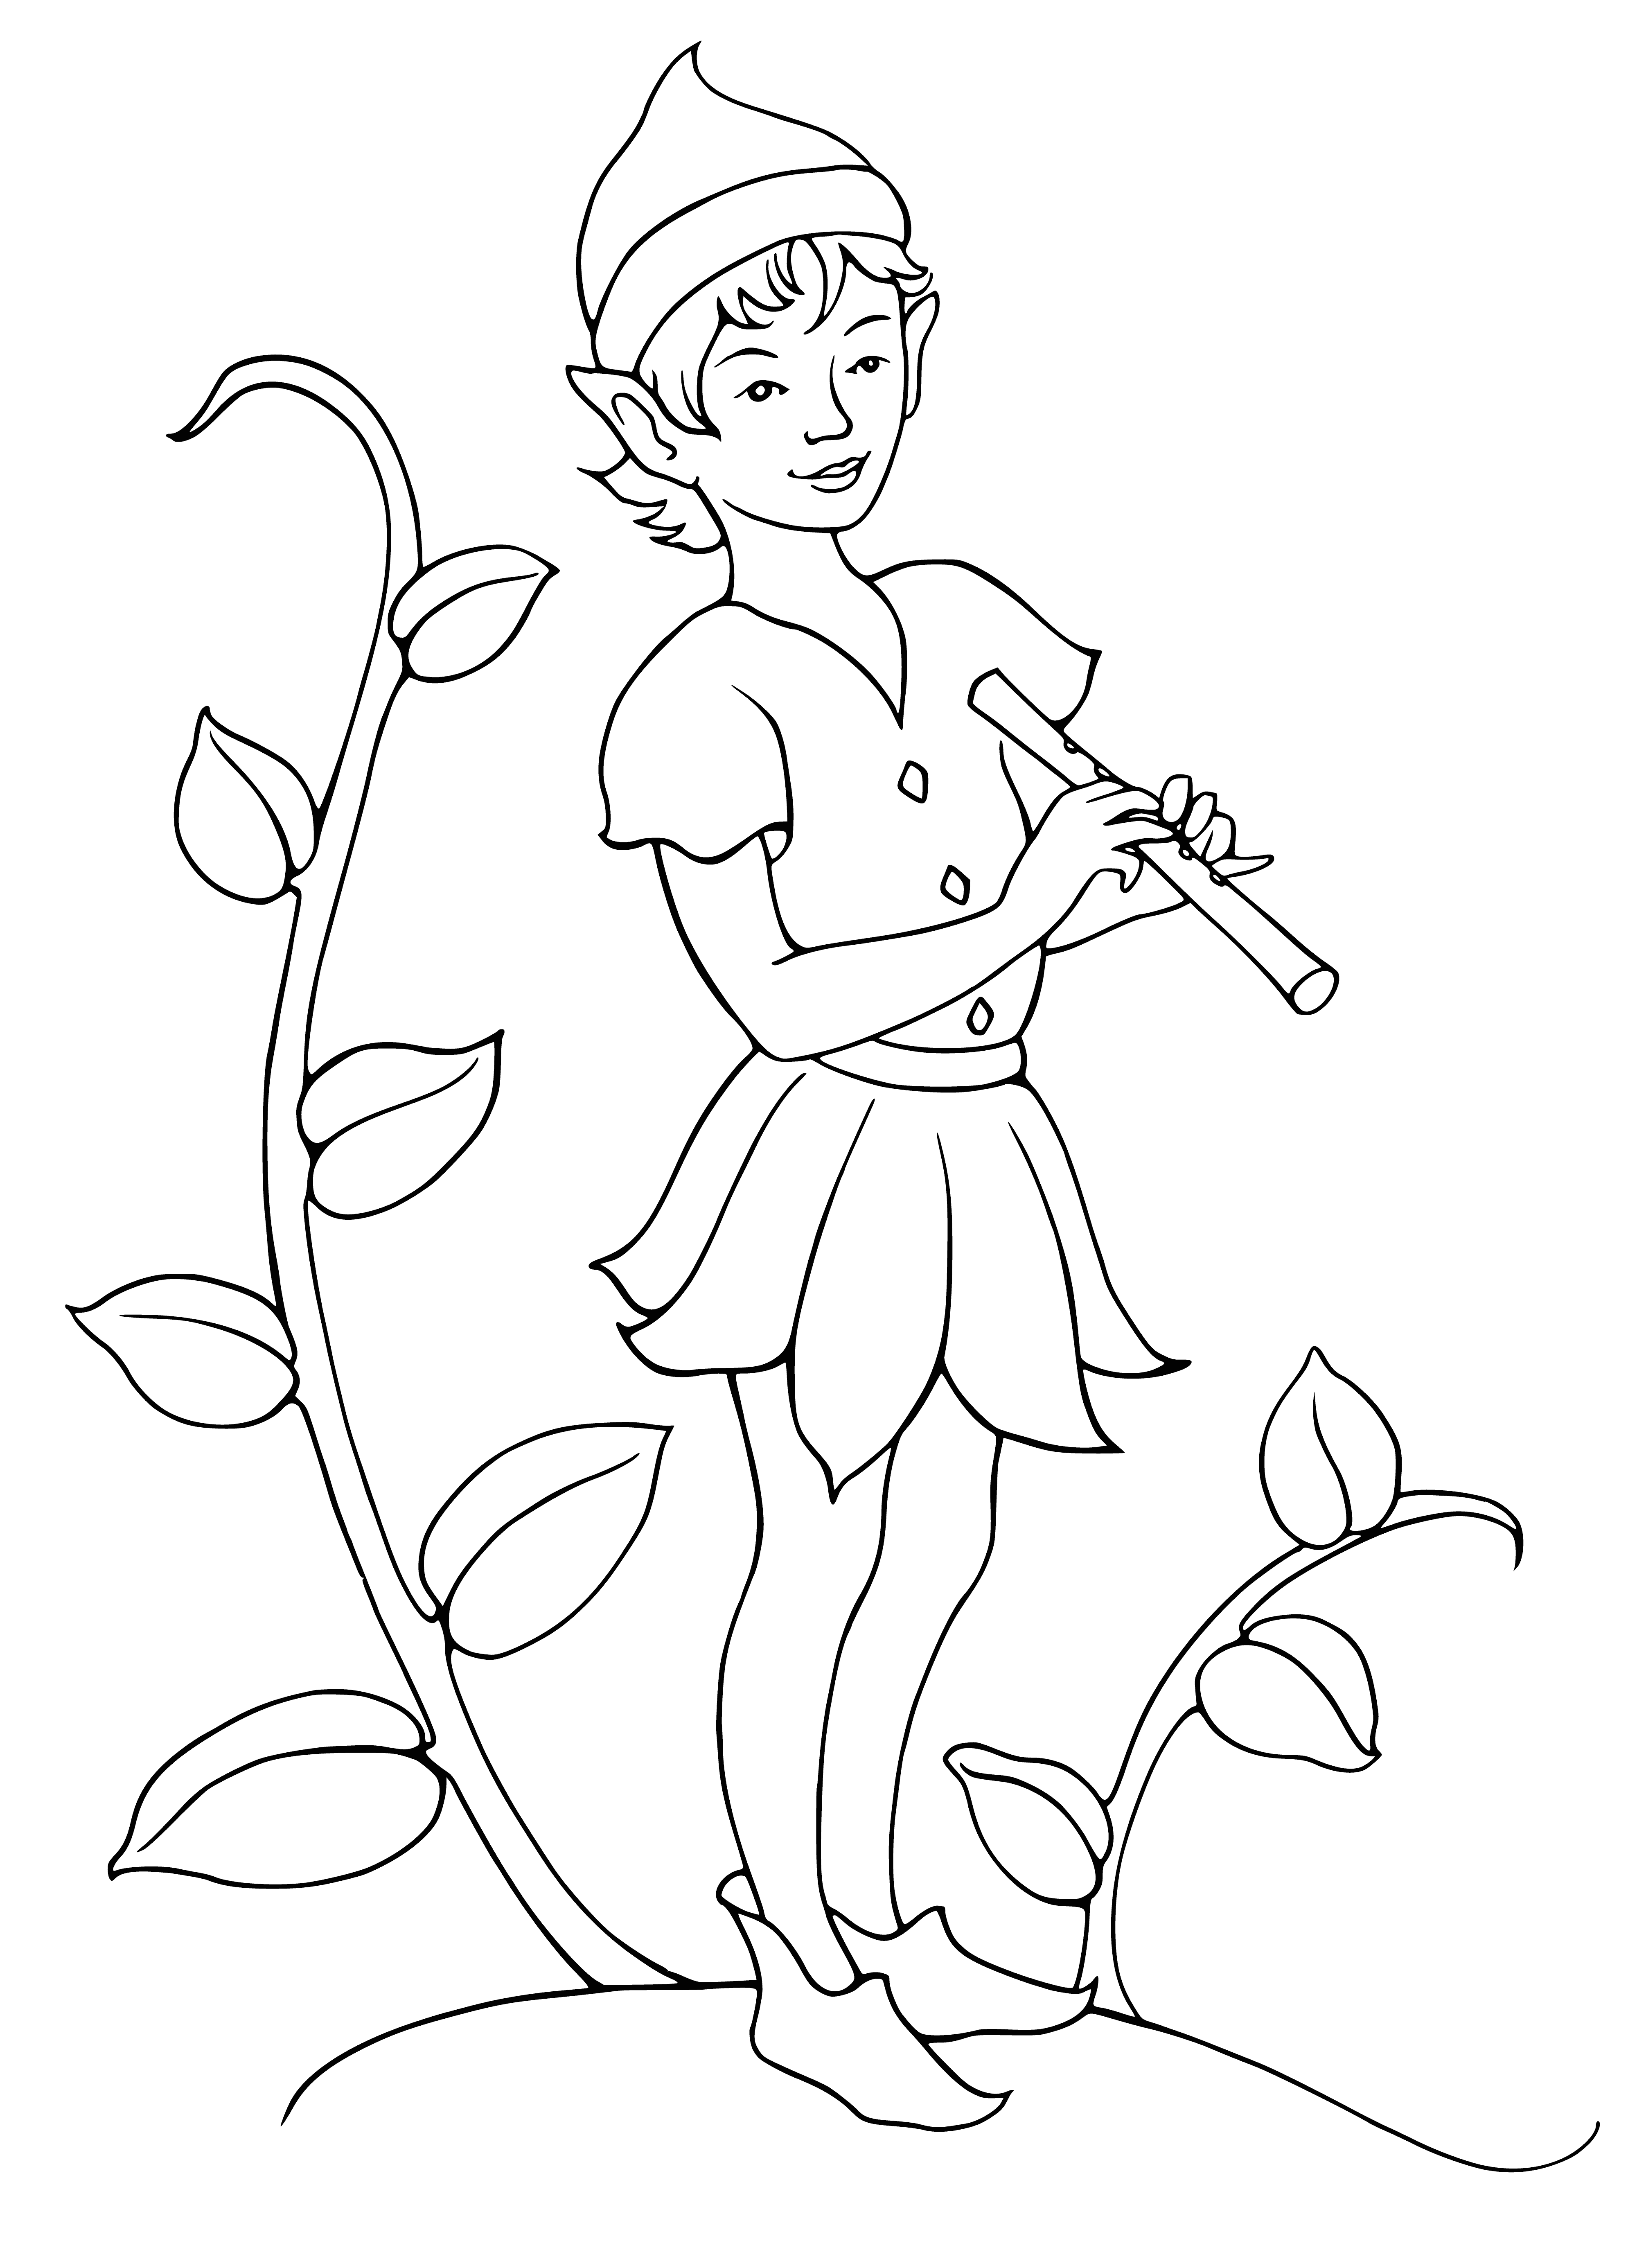 coloring page: Elf boy with pipe holds bag of silver coins, wearing green hat/jacket & pointy ears.